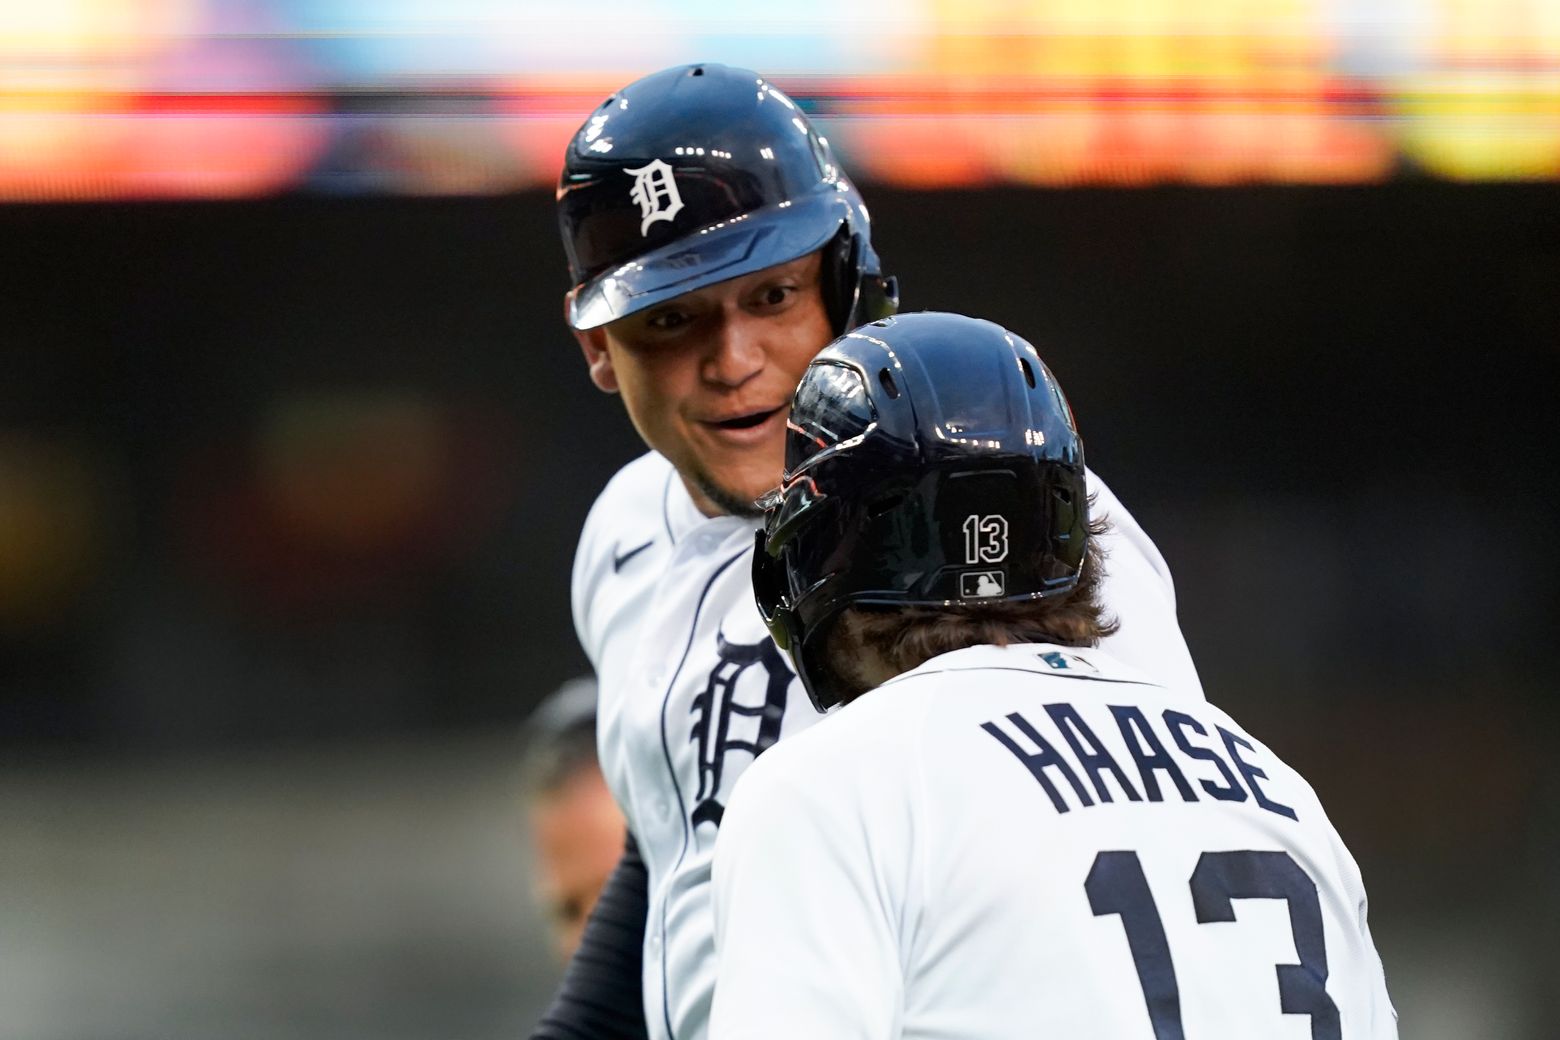 Eric Haase homers in 1st and helps Tigers beat Mariners